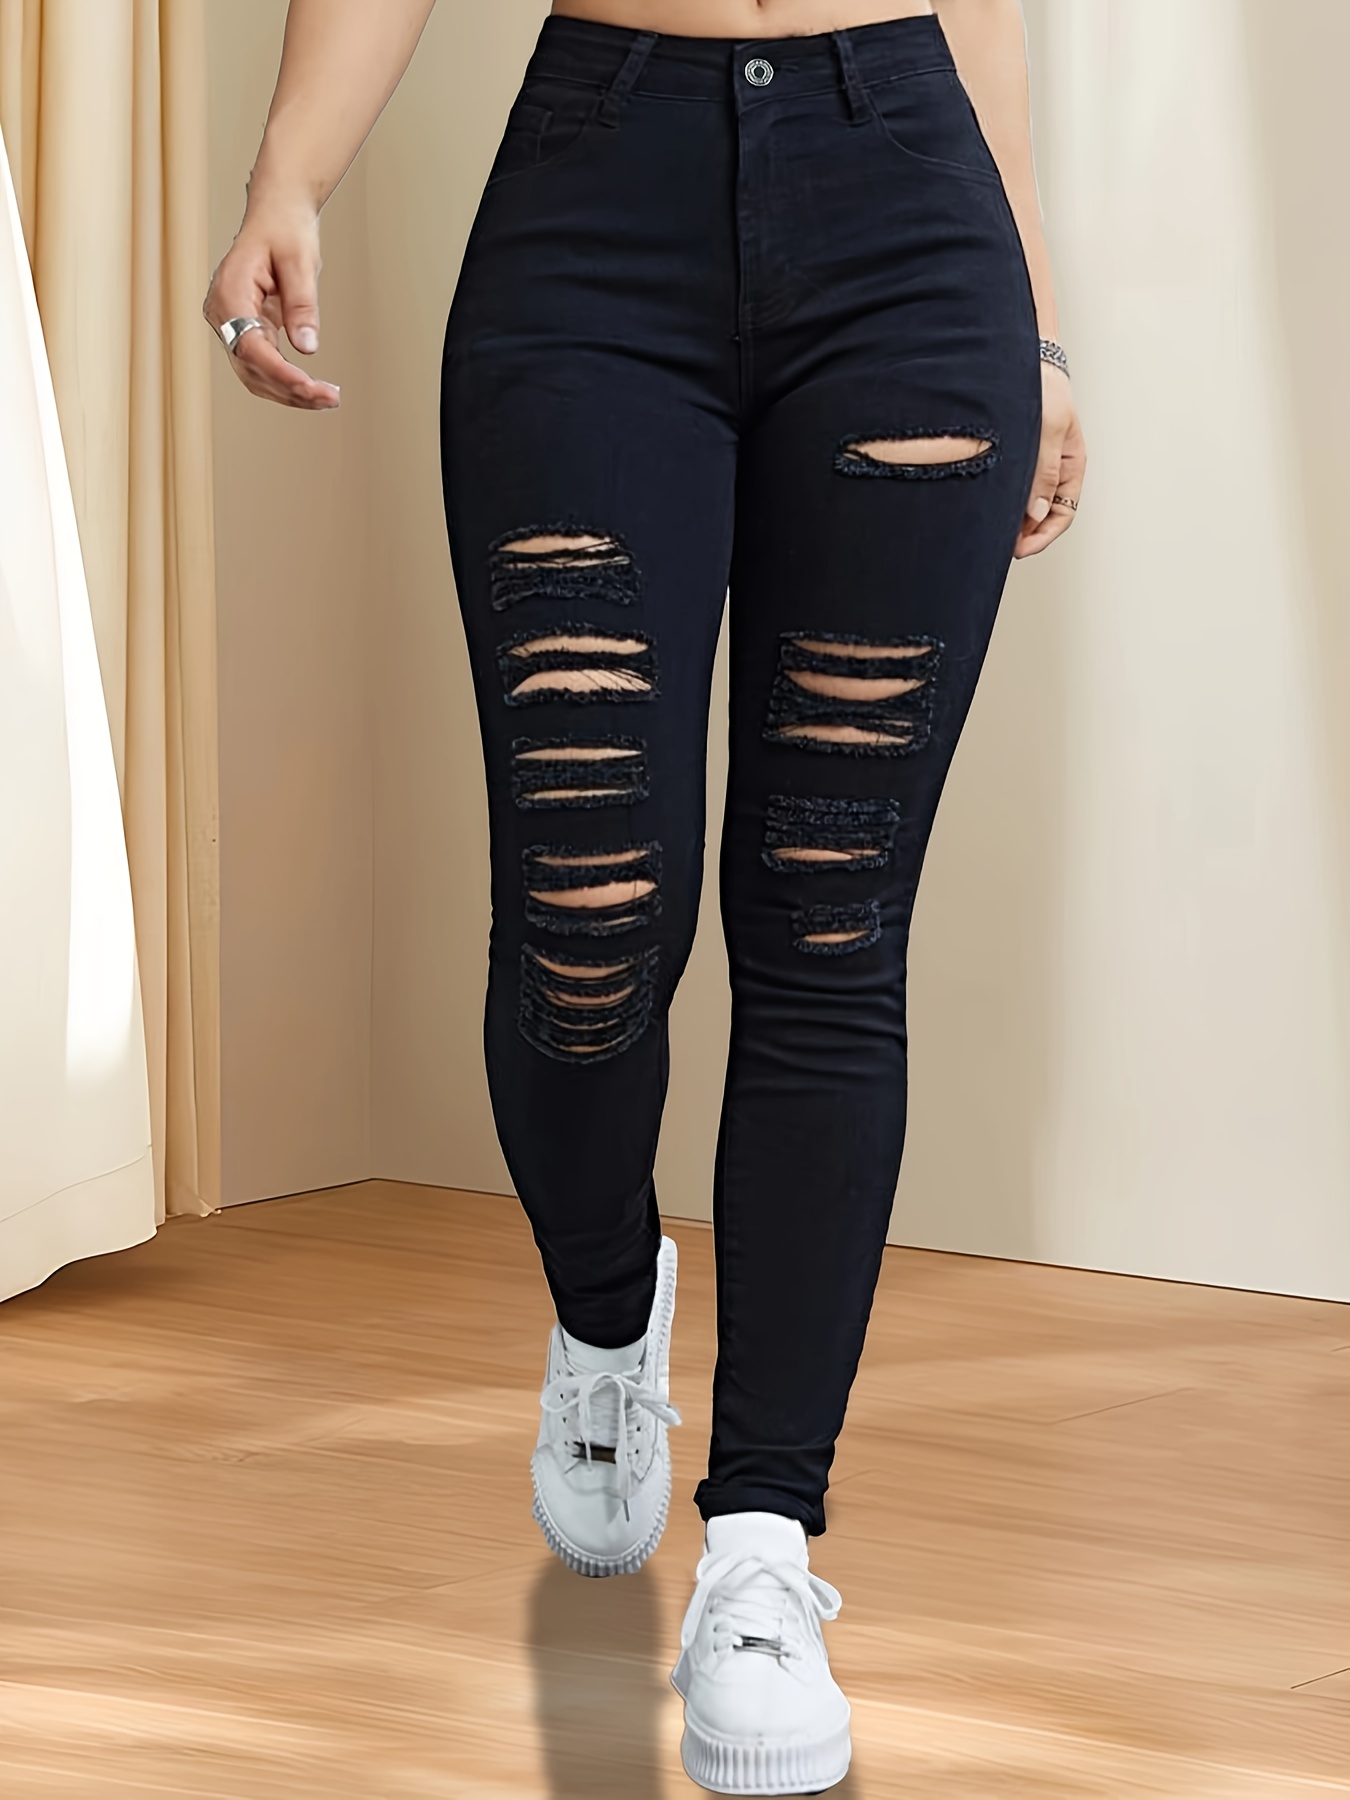 black ripped holes skinny jeans slim fit high stretch casual tight jeans womens denim jeans clothing